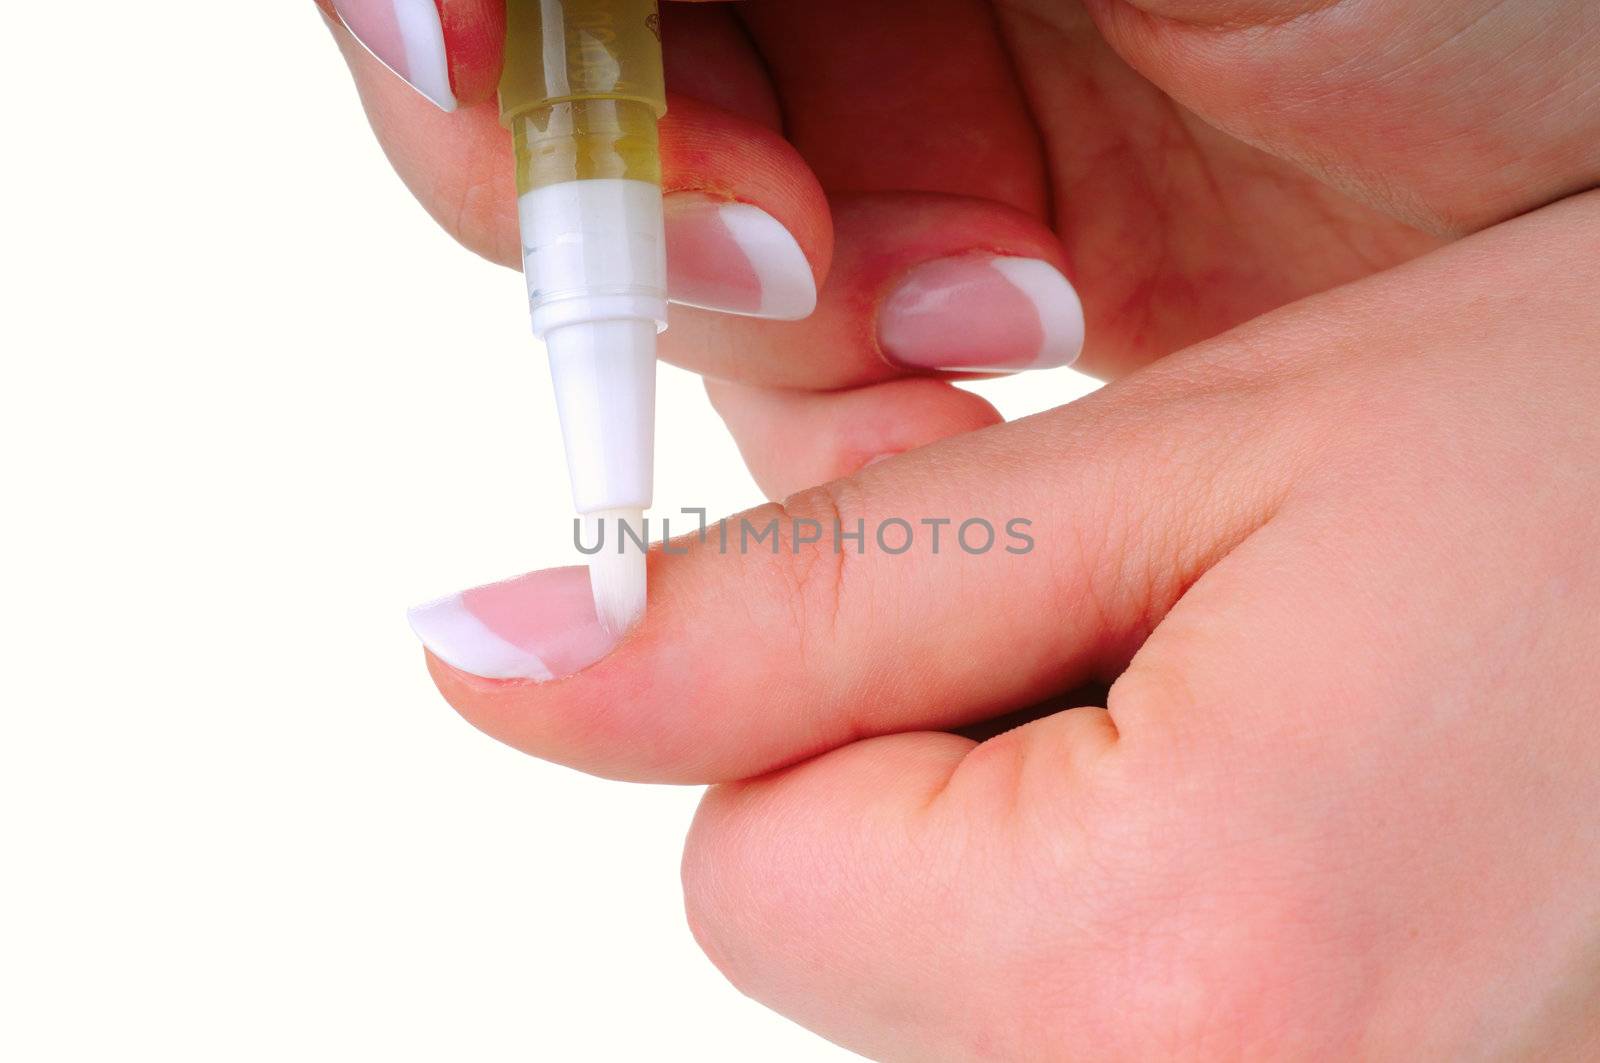 Oil applying on nail as a part of manicure